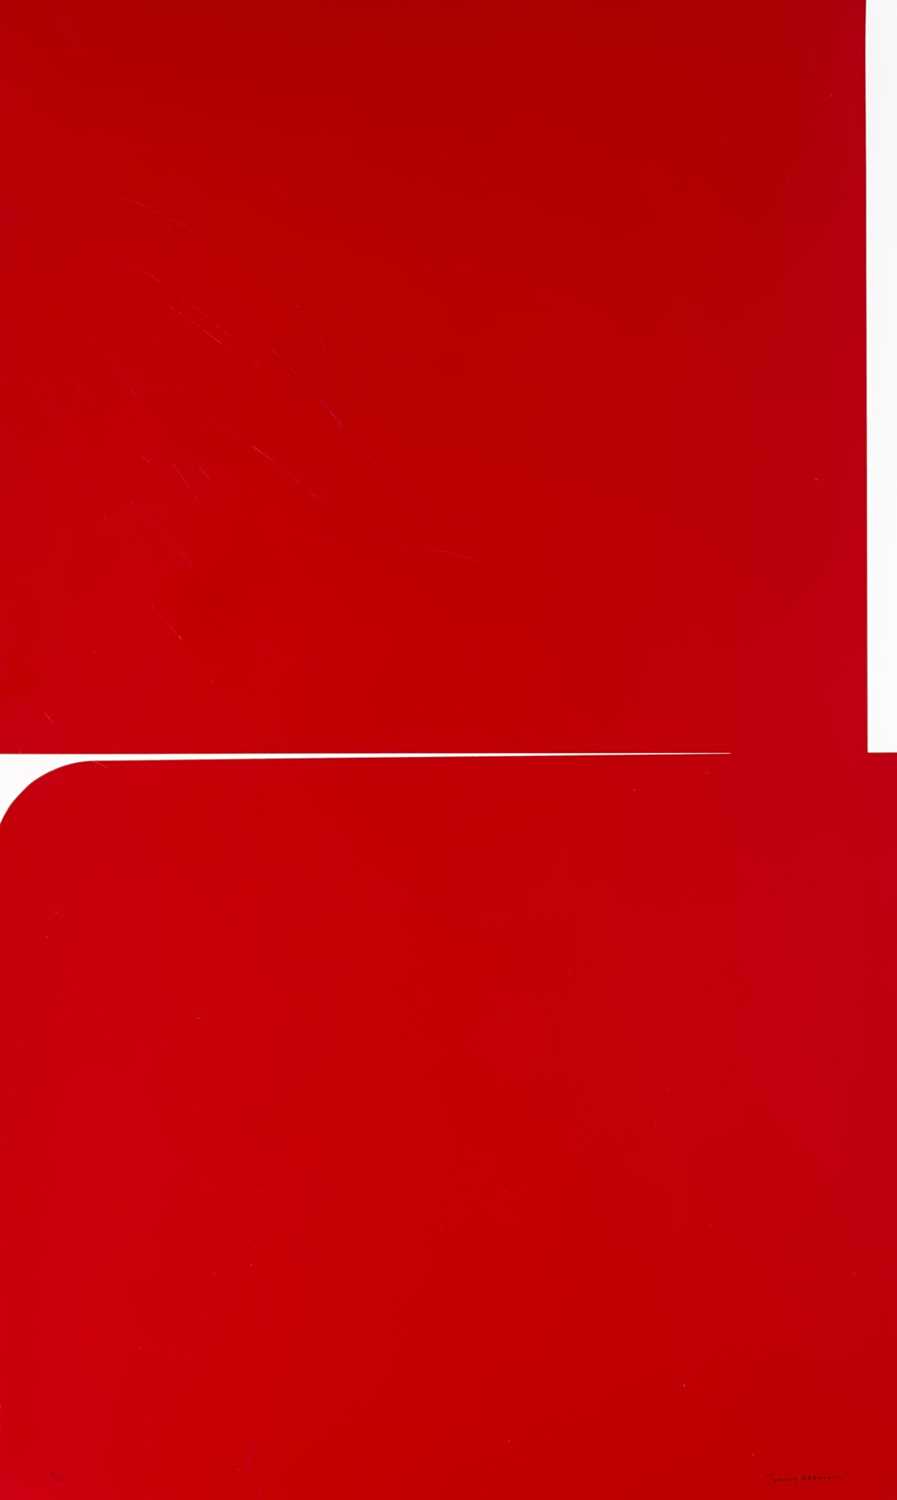 Lot 87 - Johnny Abrahams (American 1979-), 'Untitled (Red)', 2021